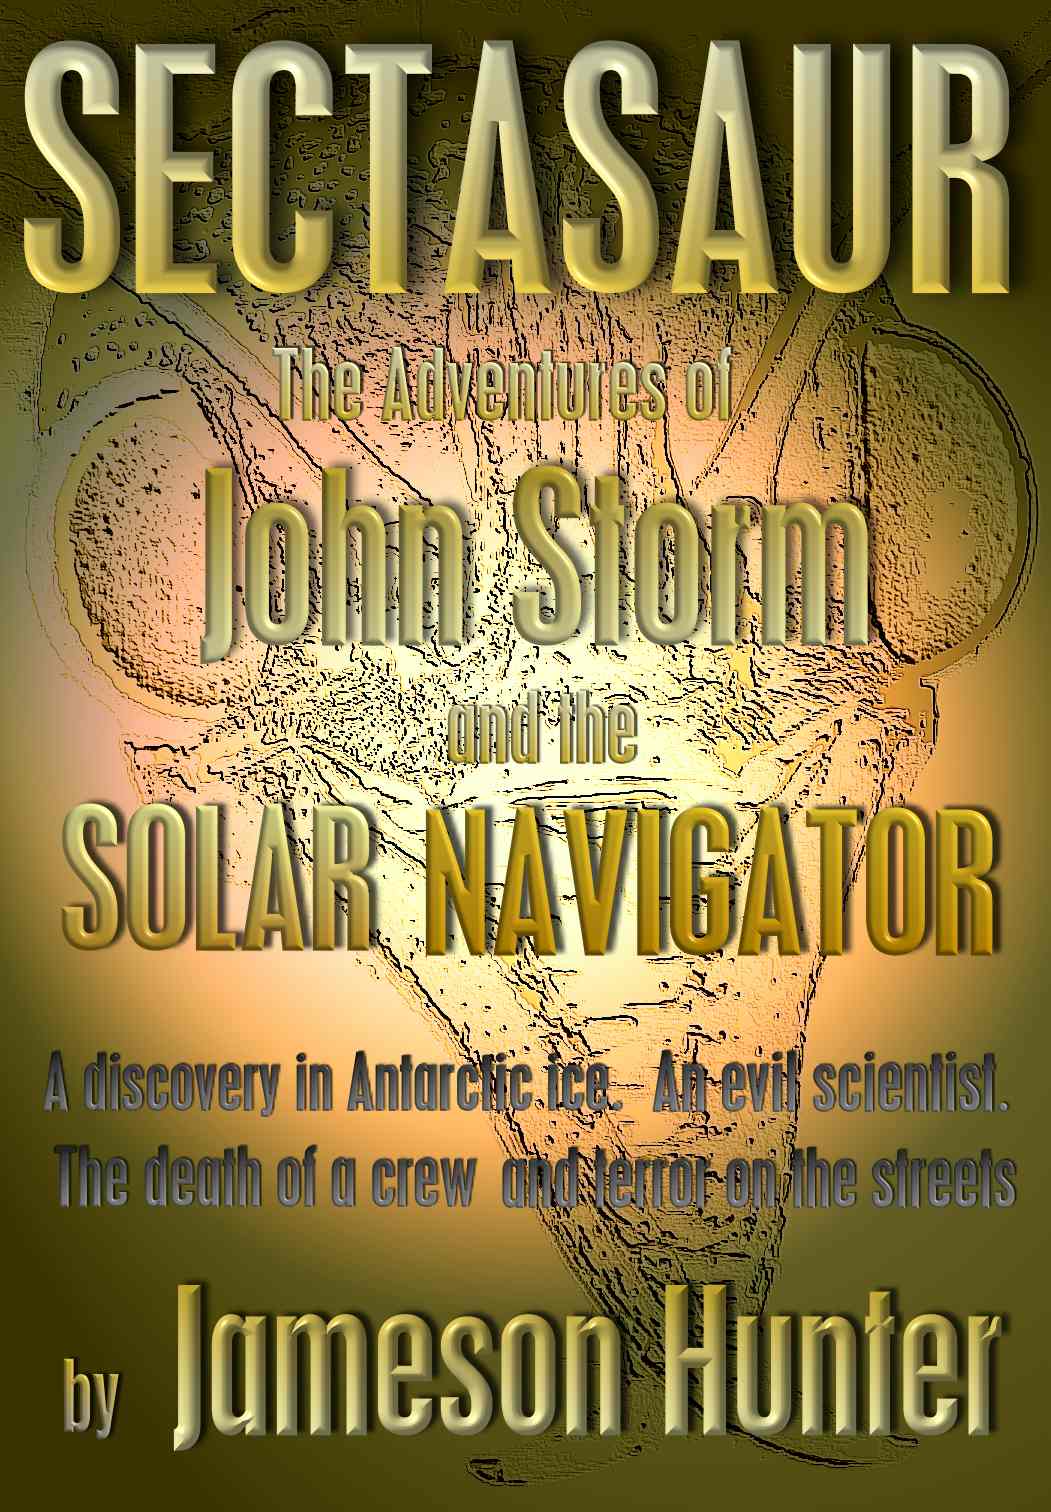 Global warming lets loose a creature that time forgot, John Storm is sent to investigate